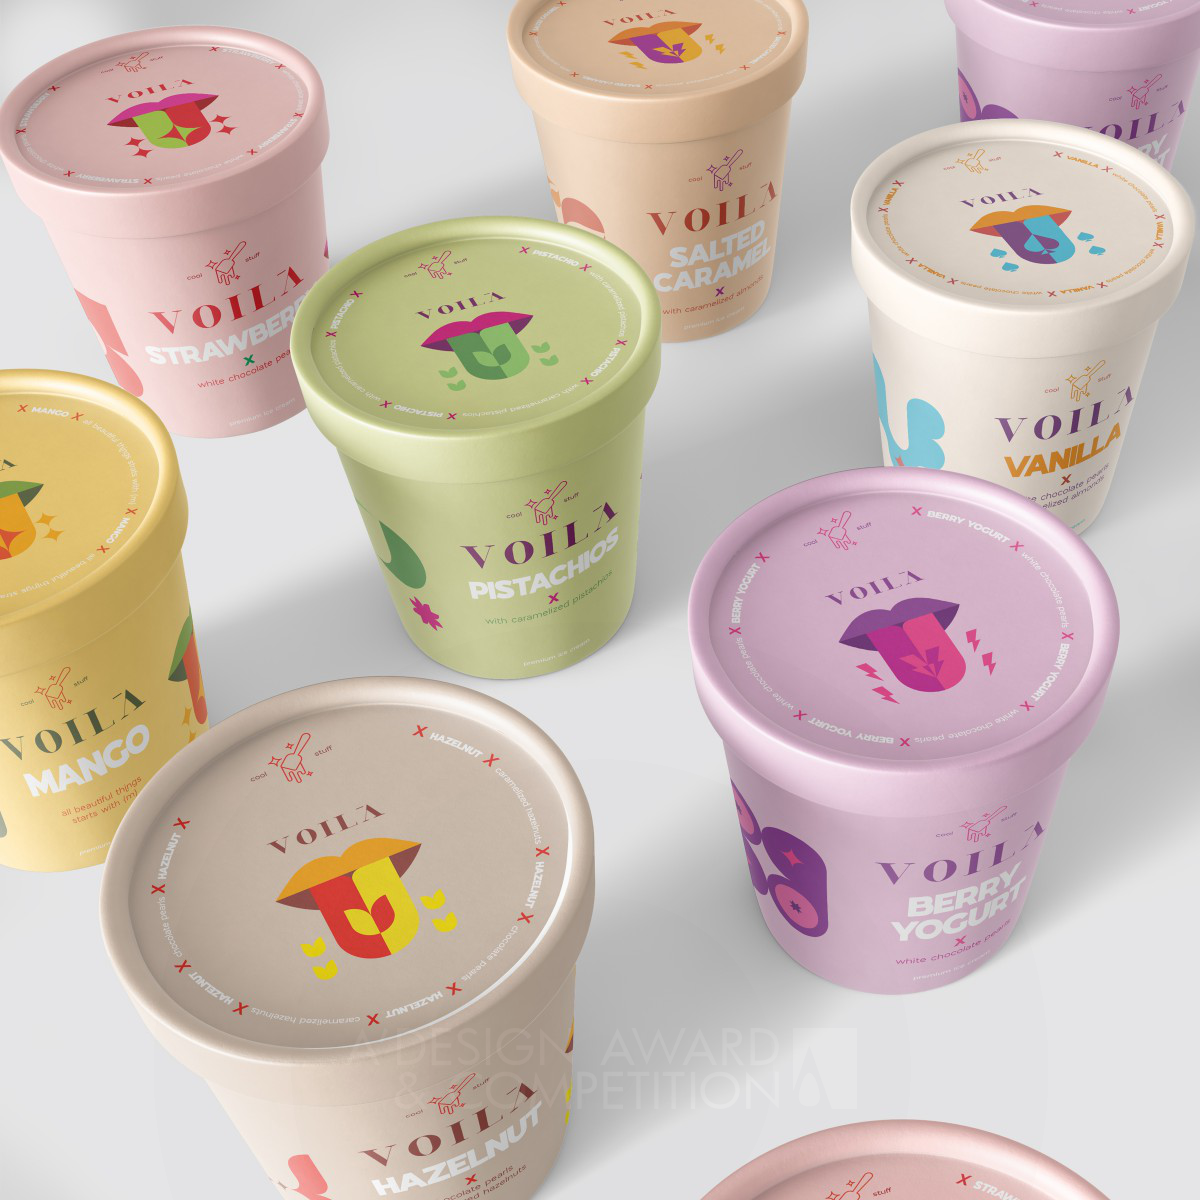 Voila Cool Stuff Ice Cream Packaging by BOLD Branding